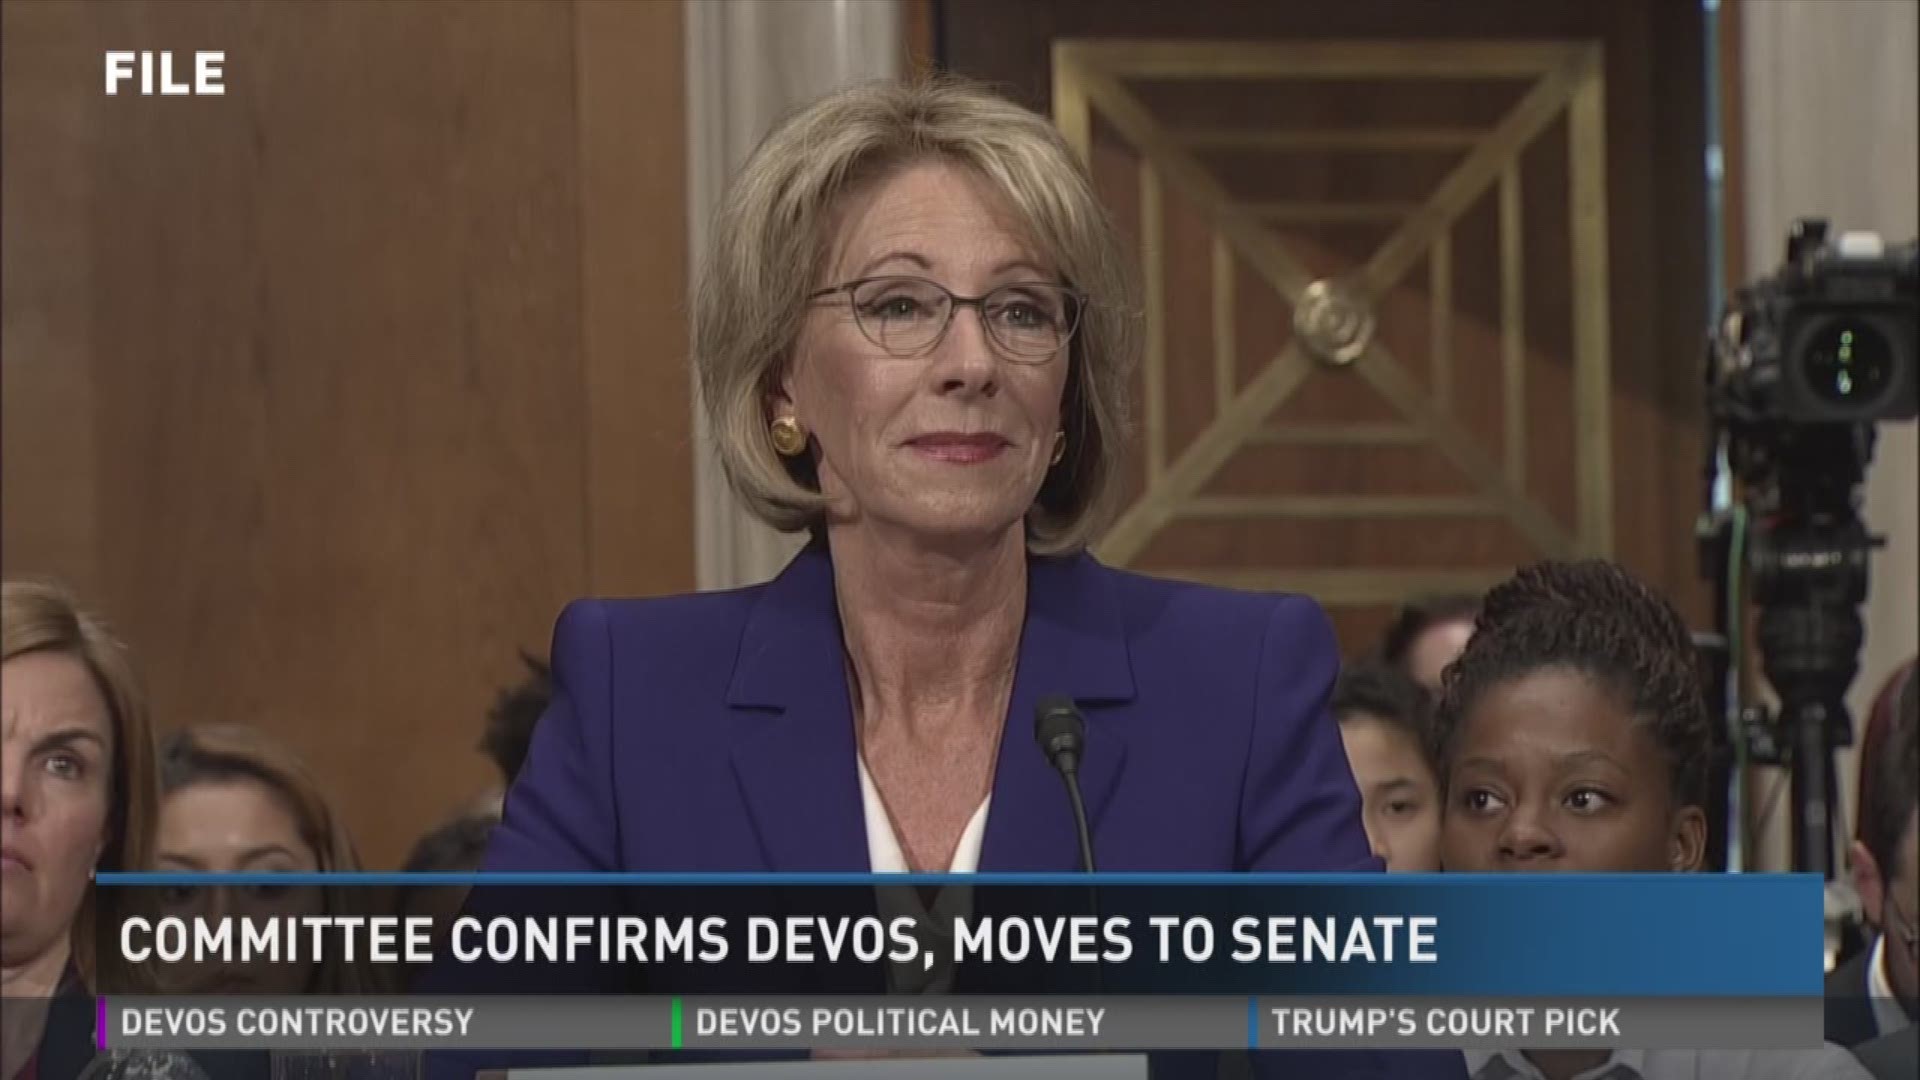 Betsy DeVos confirmation as Secretary of Education now goes to the full Senate